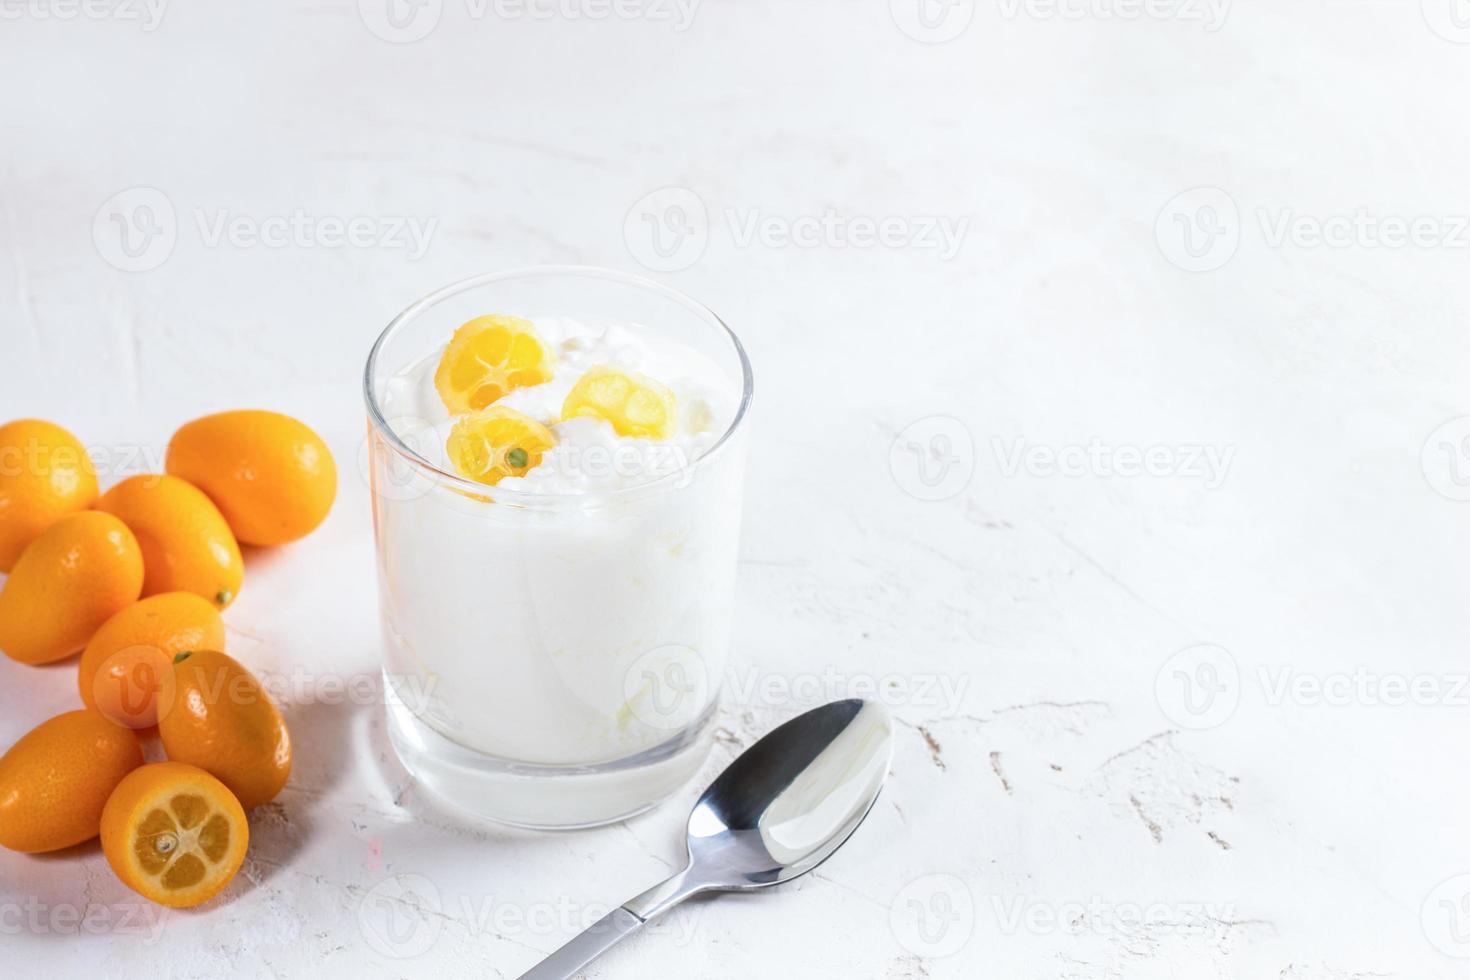 White yogurt with slices of kumquat in glass, whole fruits and metallic spoon on white background. photo